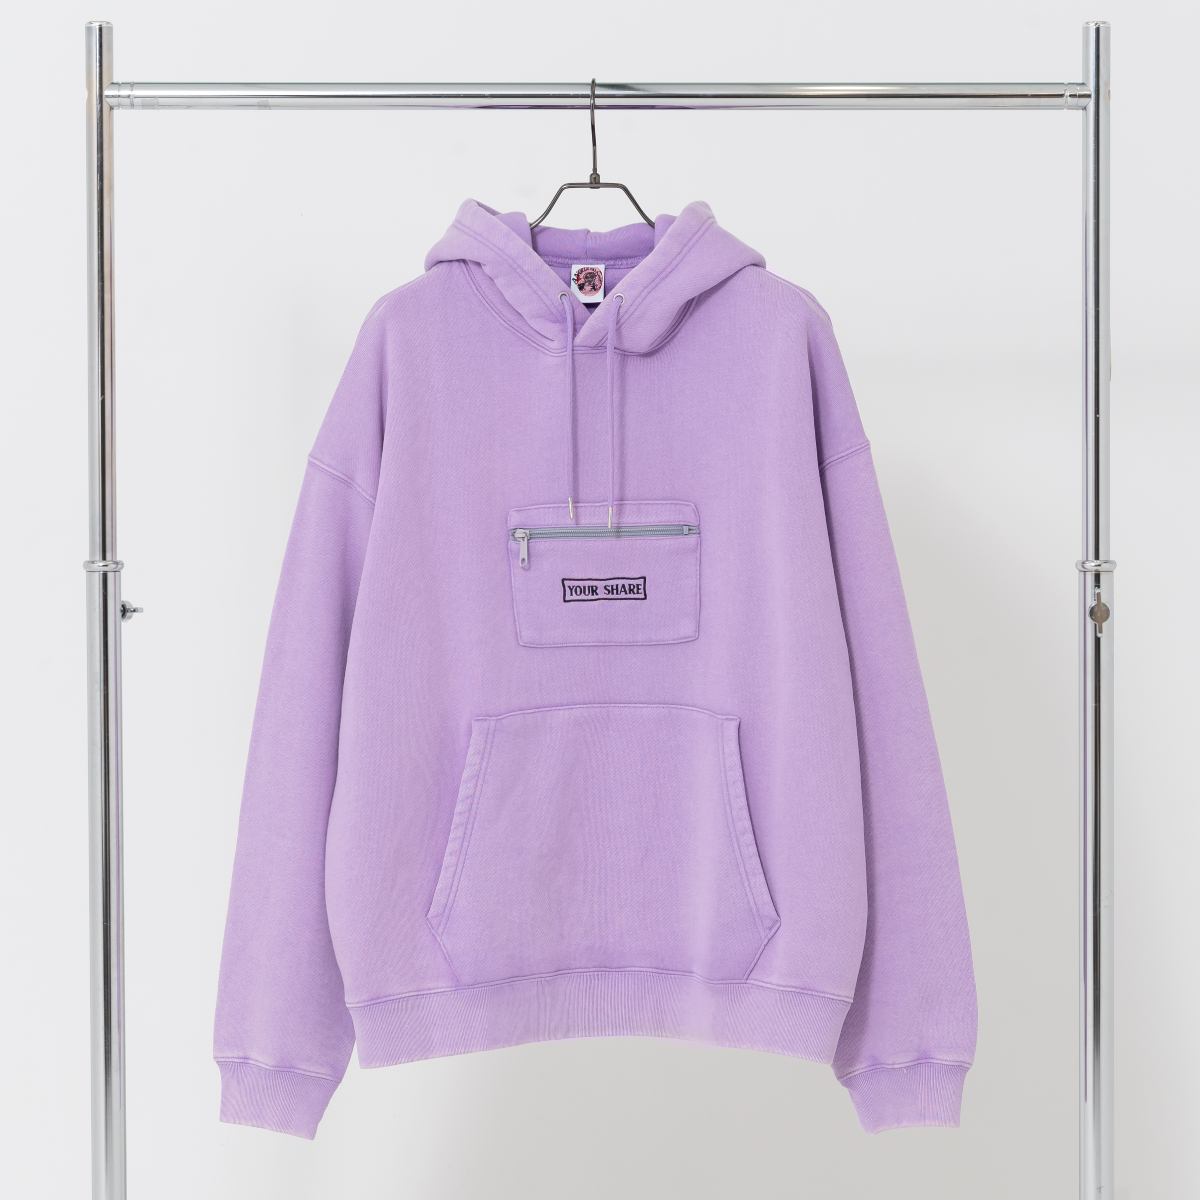 Your Share-hoodie